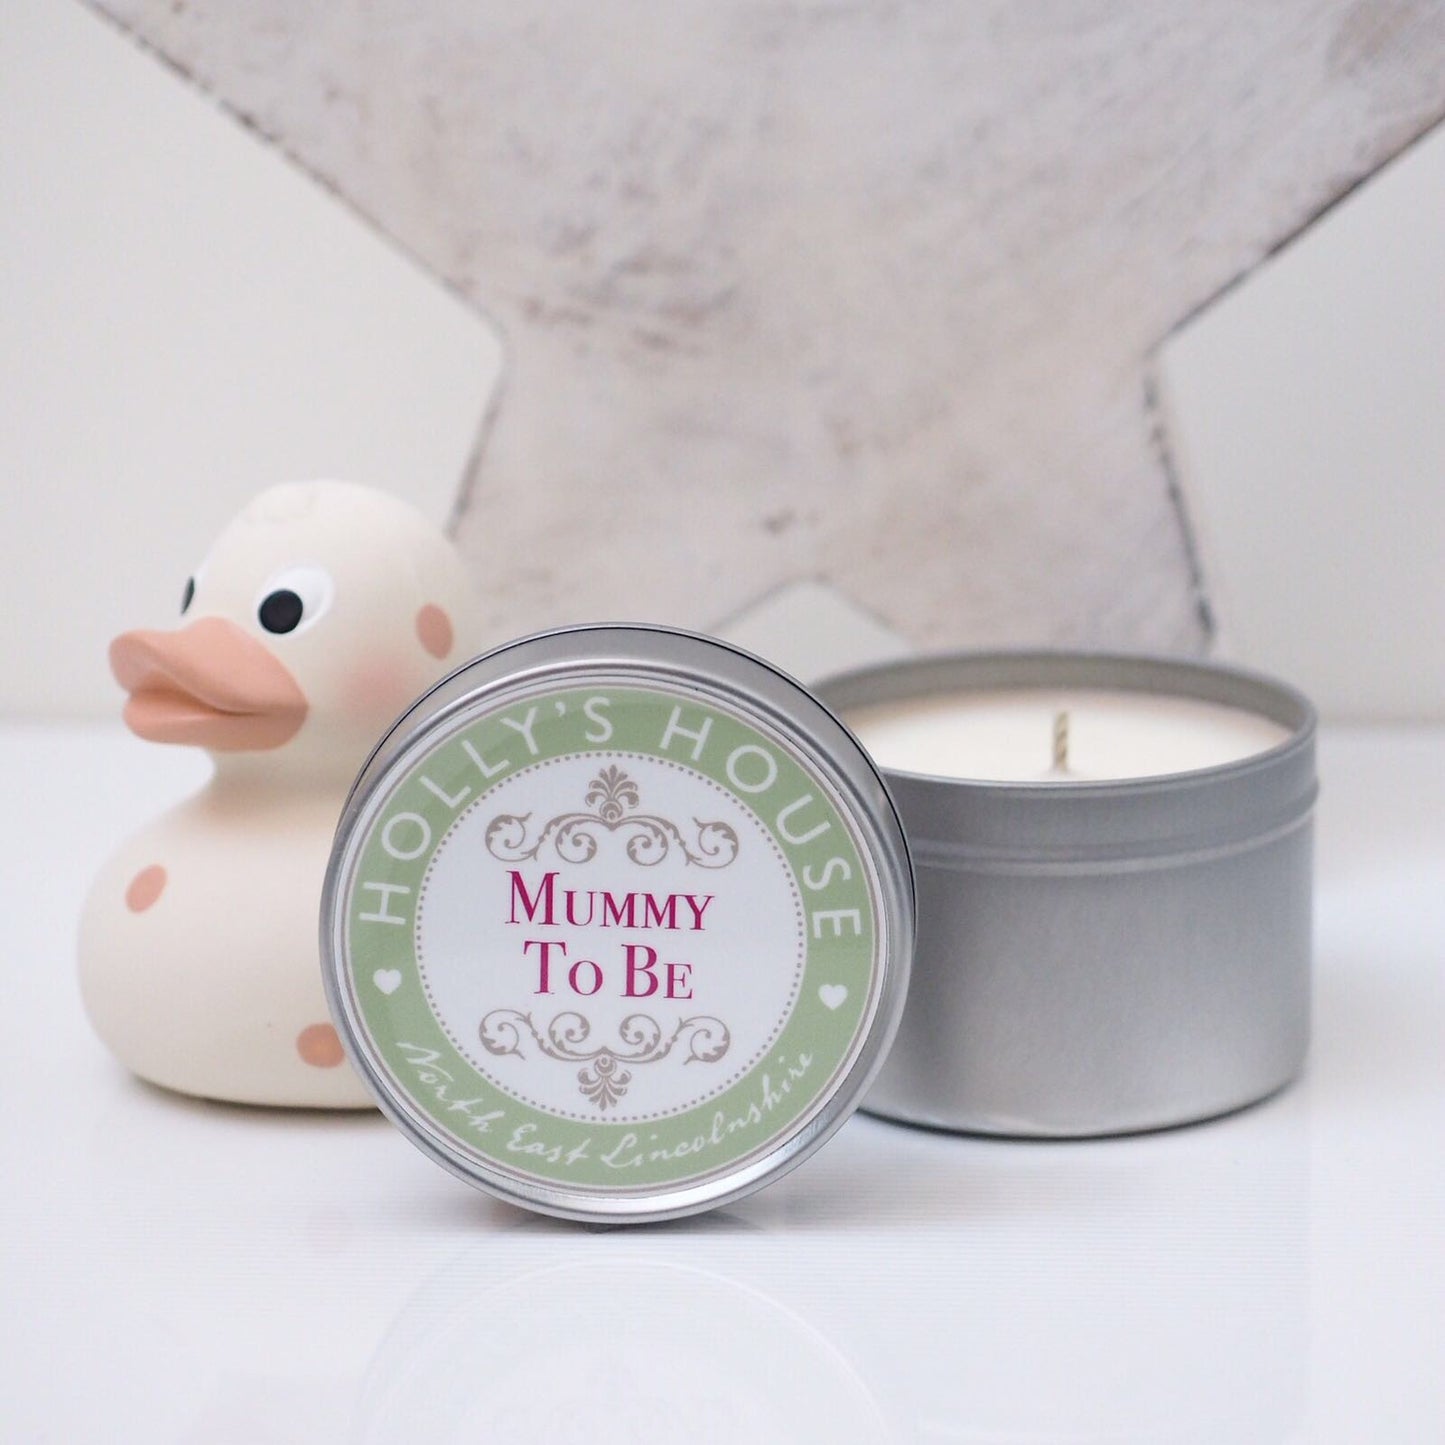 Mummy To Be Scented Candle